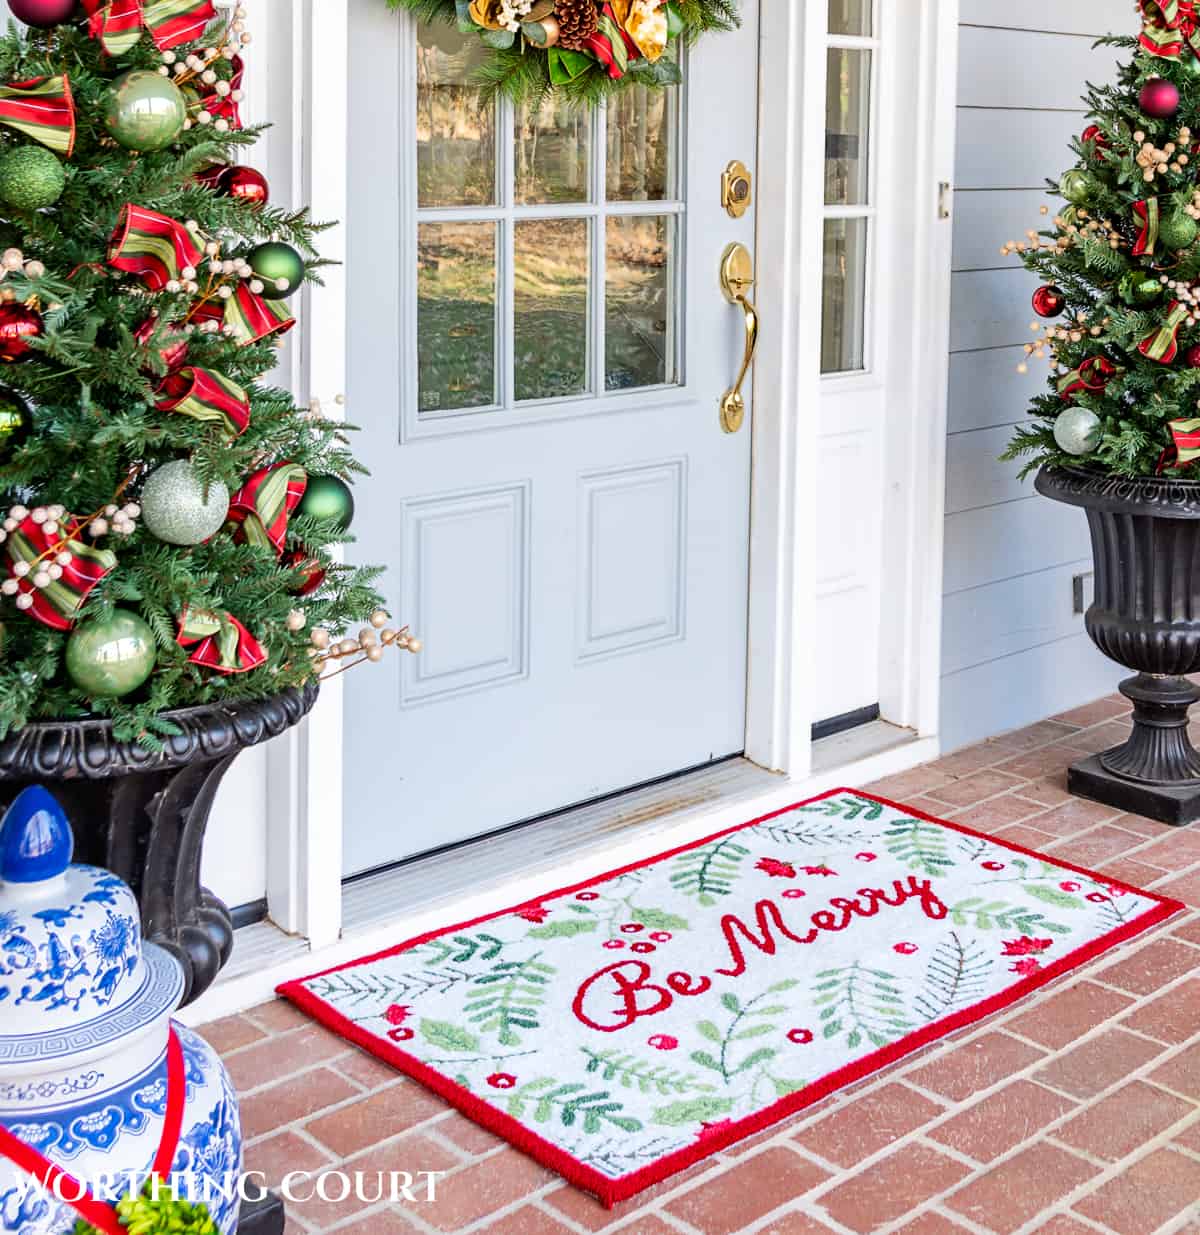 red, green and white Christmas welcome mat with the words "Be Merry" in front of a gray front door flanked by small Christmas trees in urns